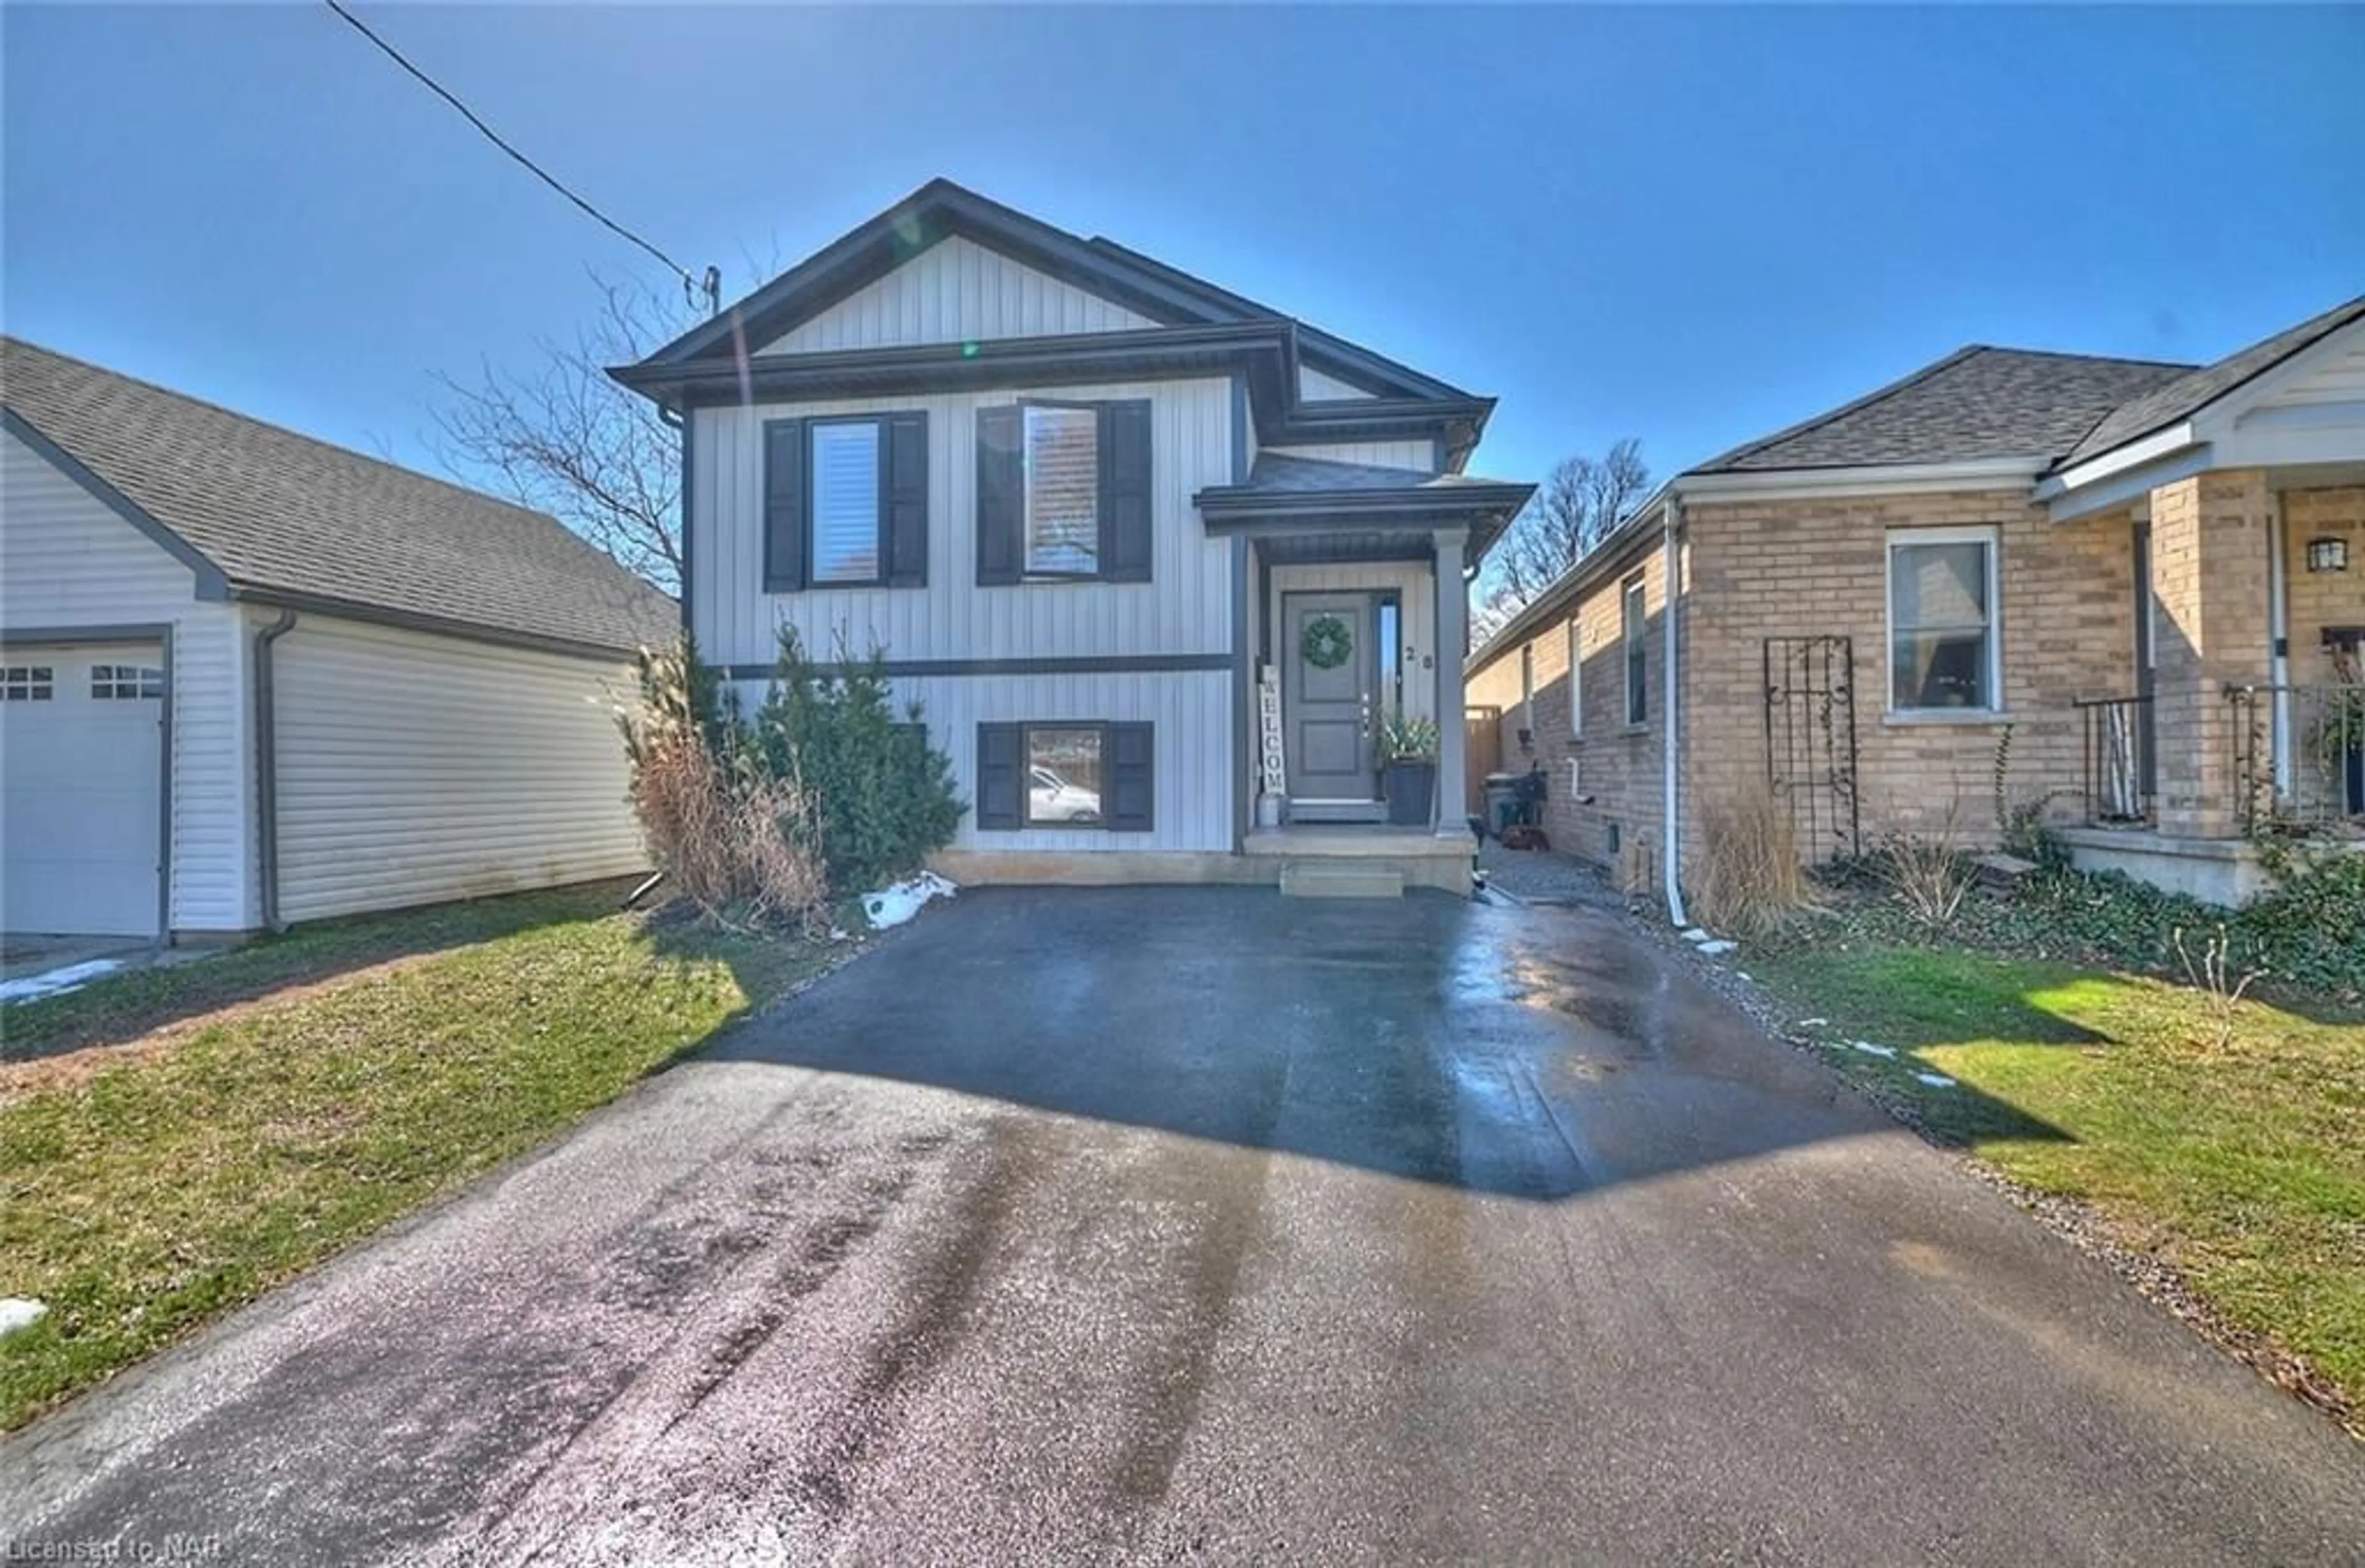 Frontside or backside of a home for 28 Churchill St, St. Catharines Ontario L2S 2P2